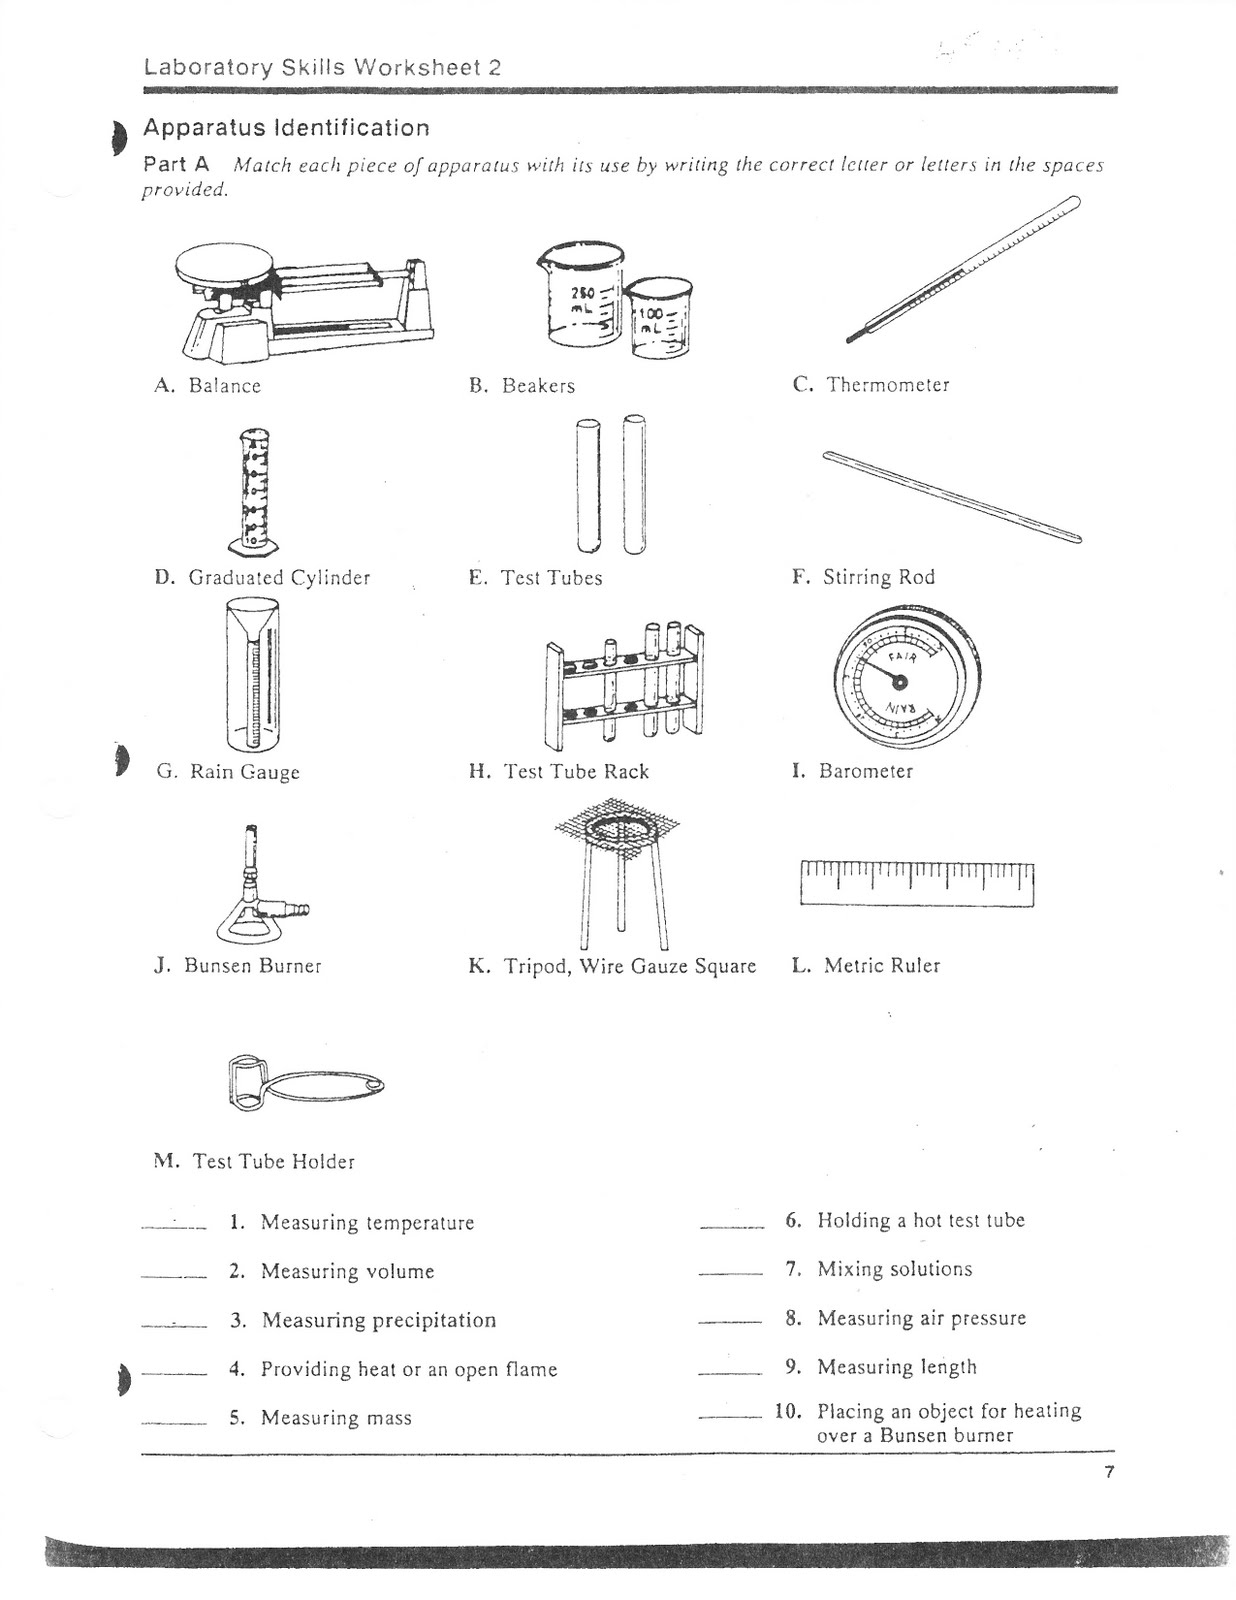 10 Best Images of Identifying Lab Equipment Worksheet - Science Lab